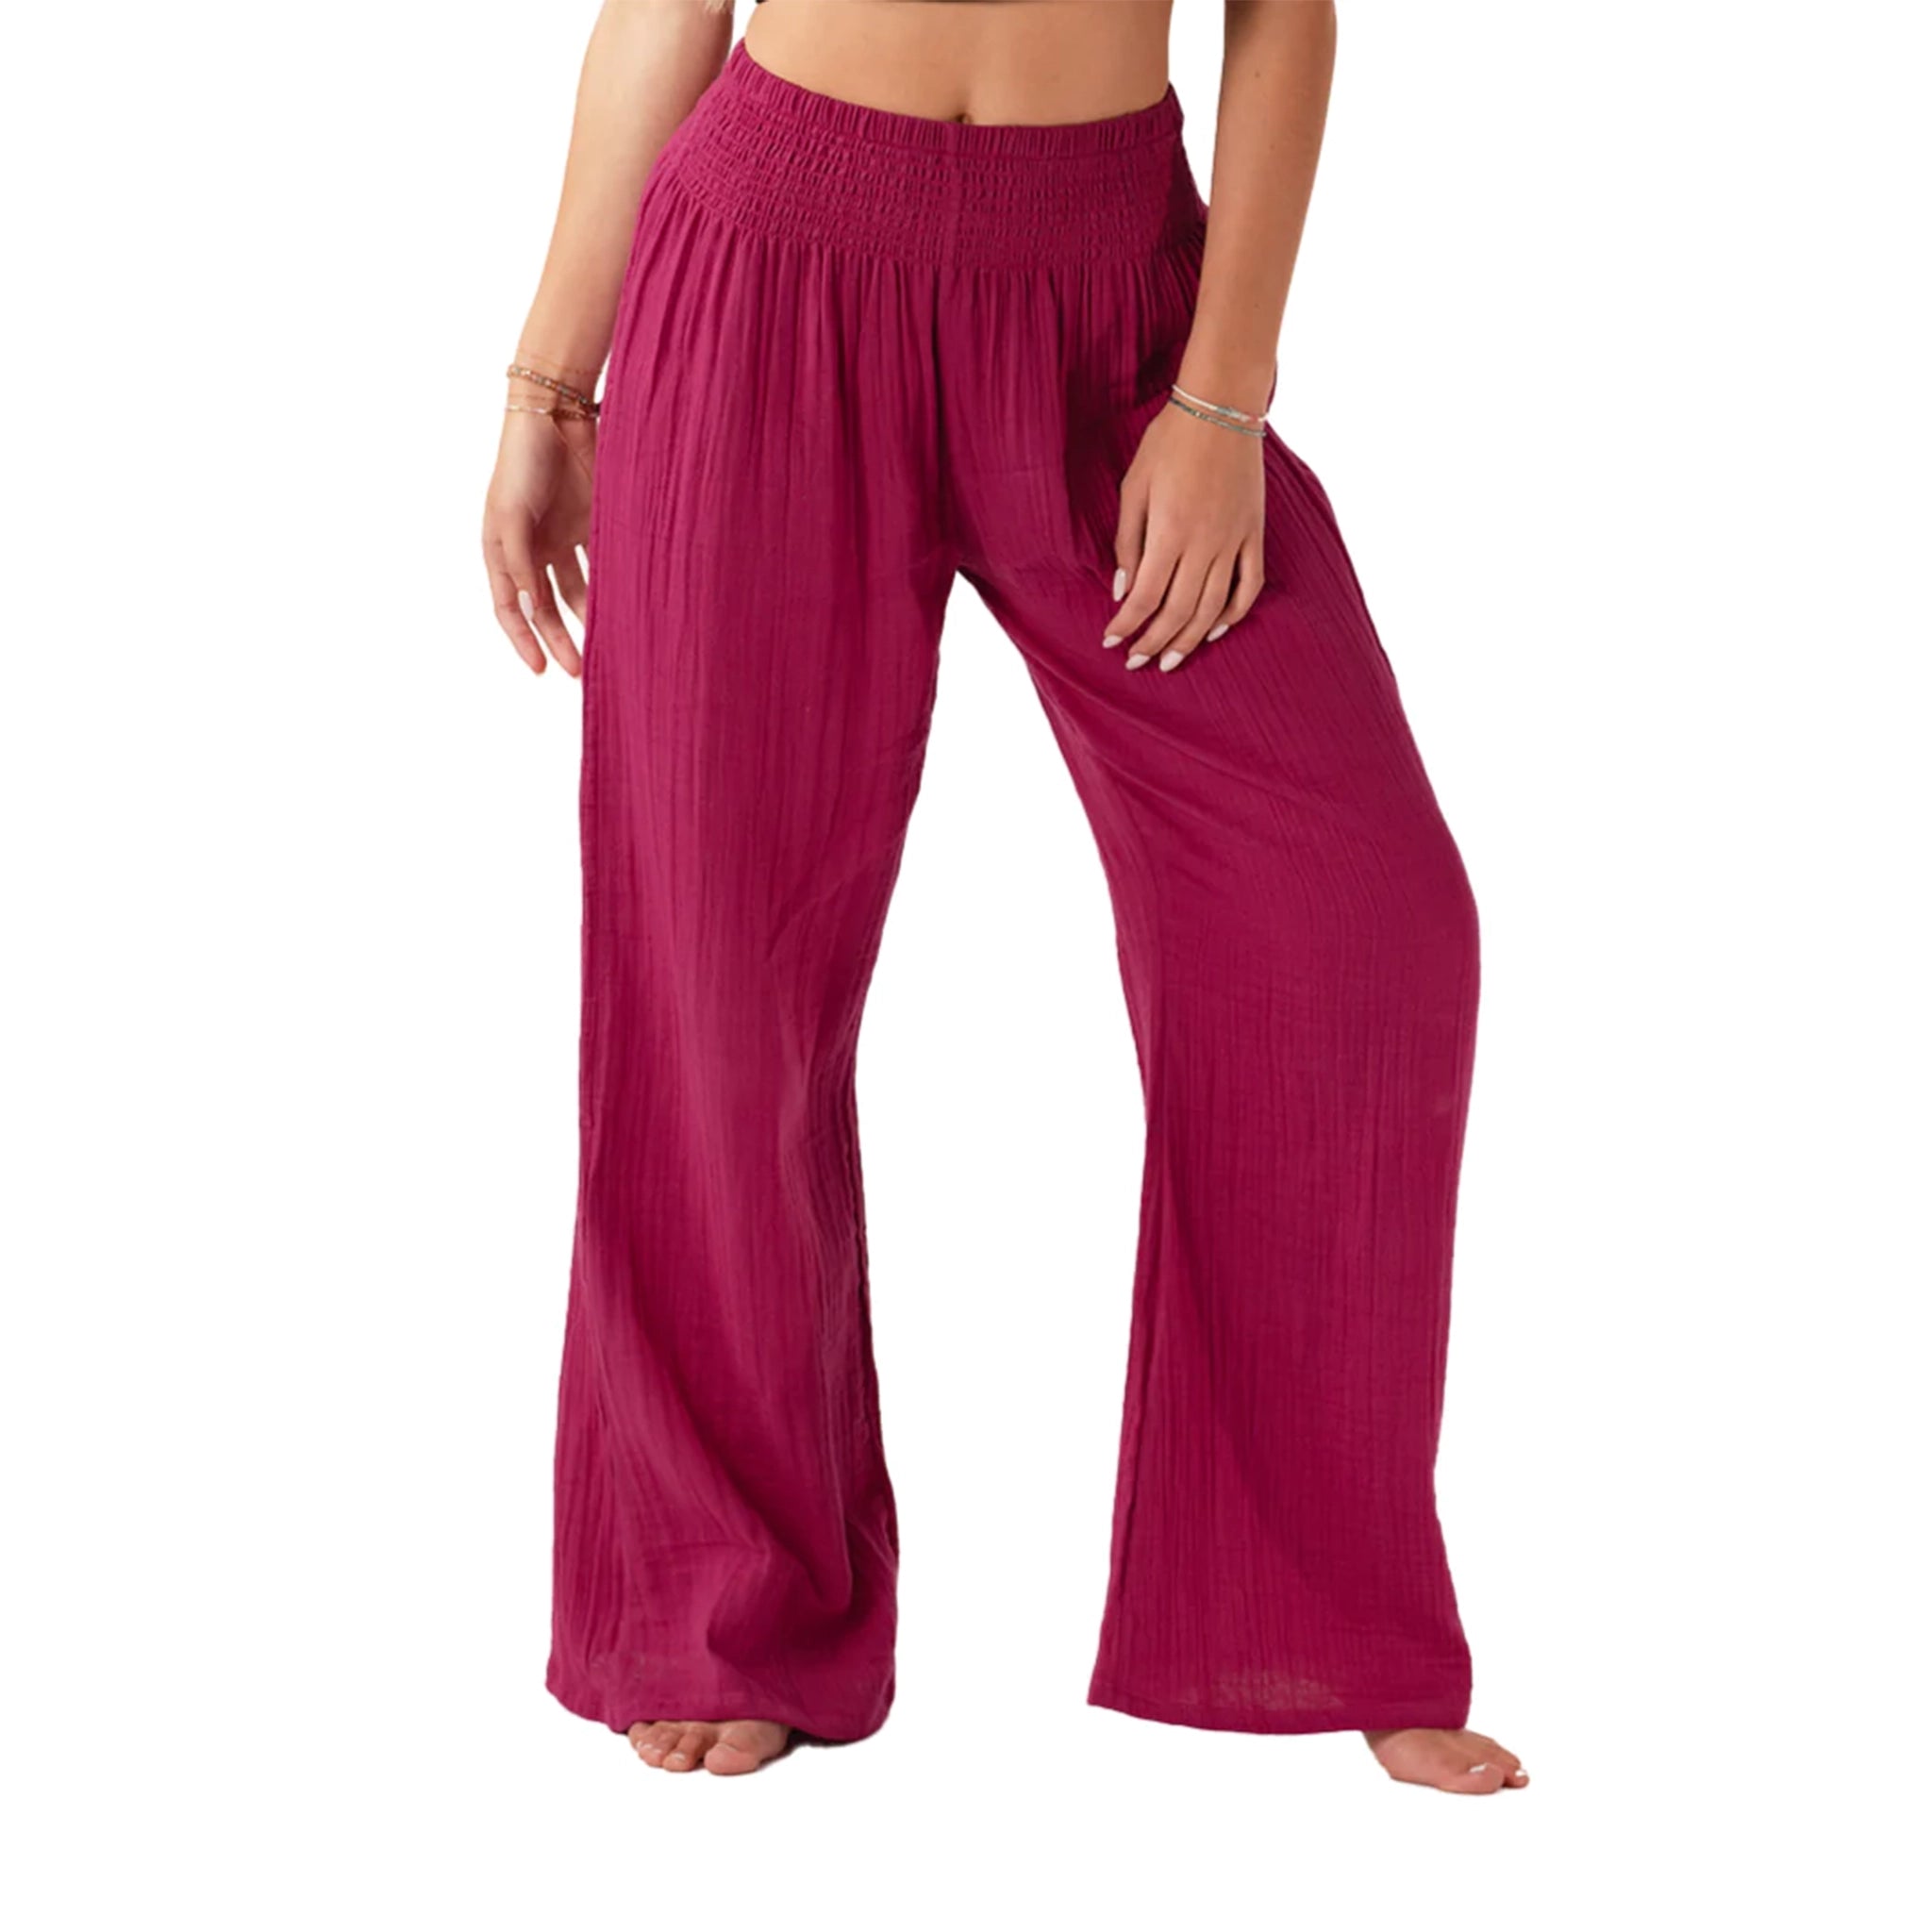 On a white background is a model wearing magenta wide leg cotton pants with an elastic drawstring.  Edit alt text